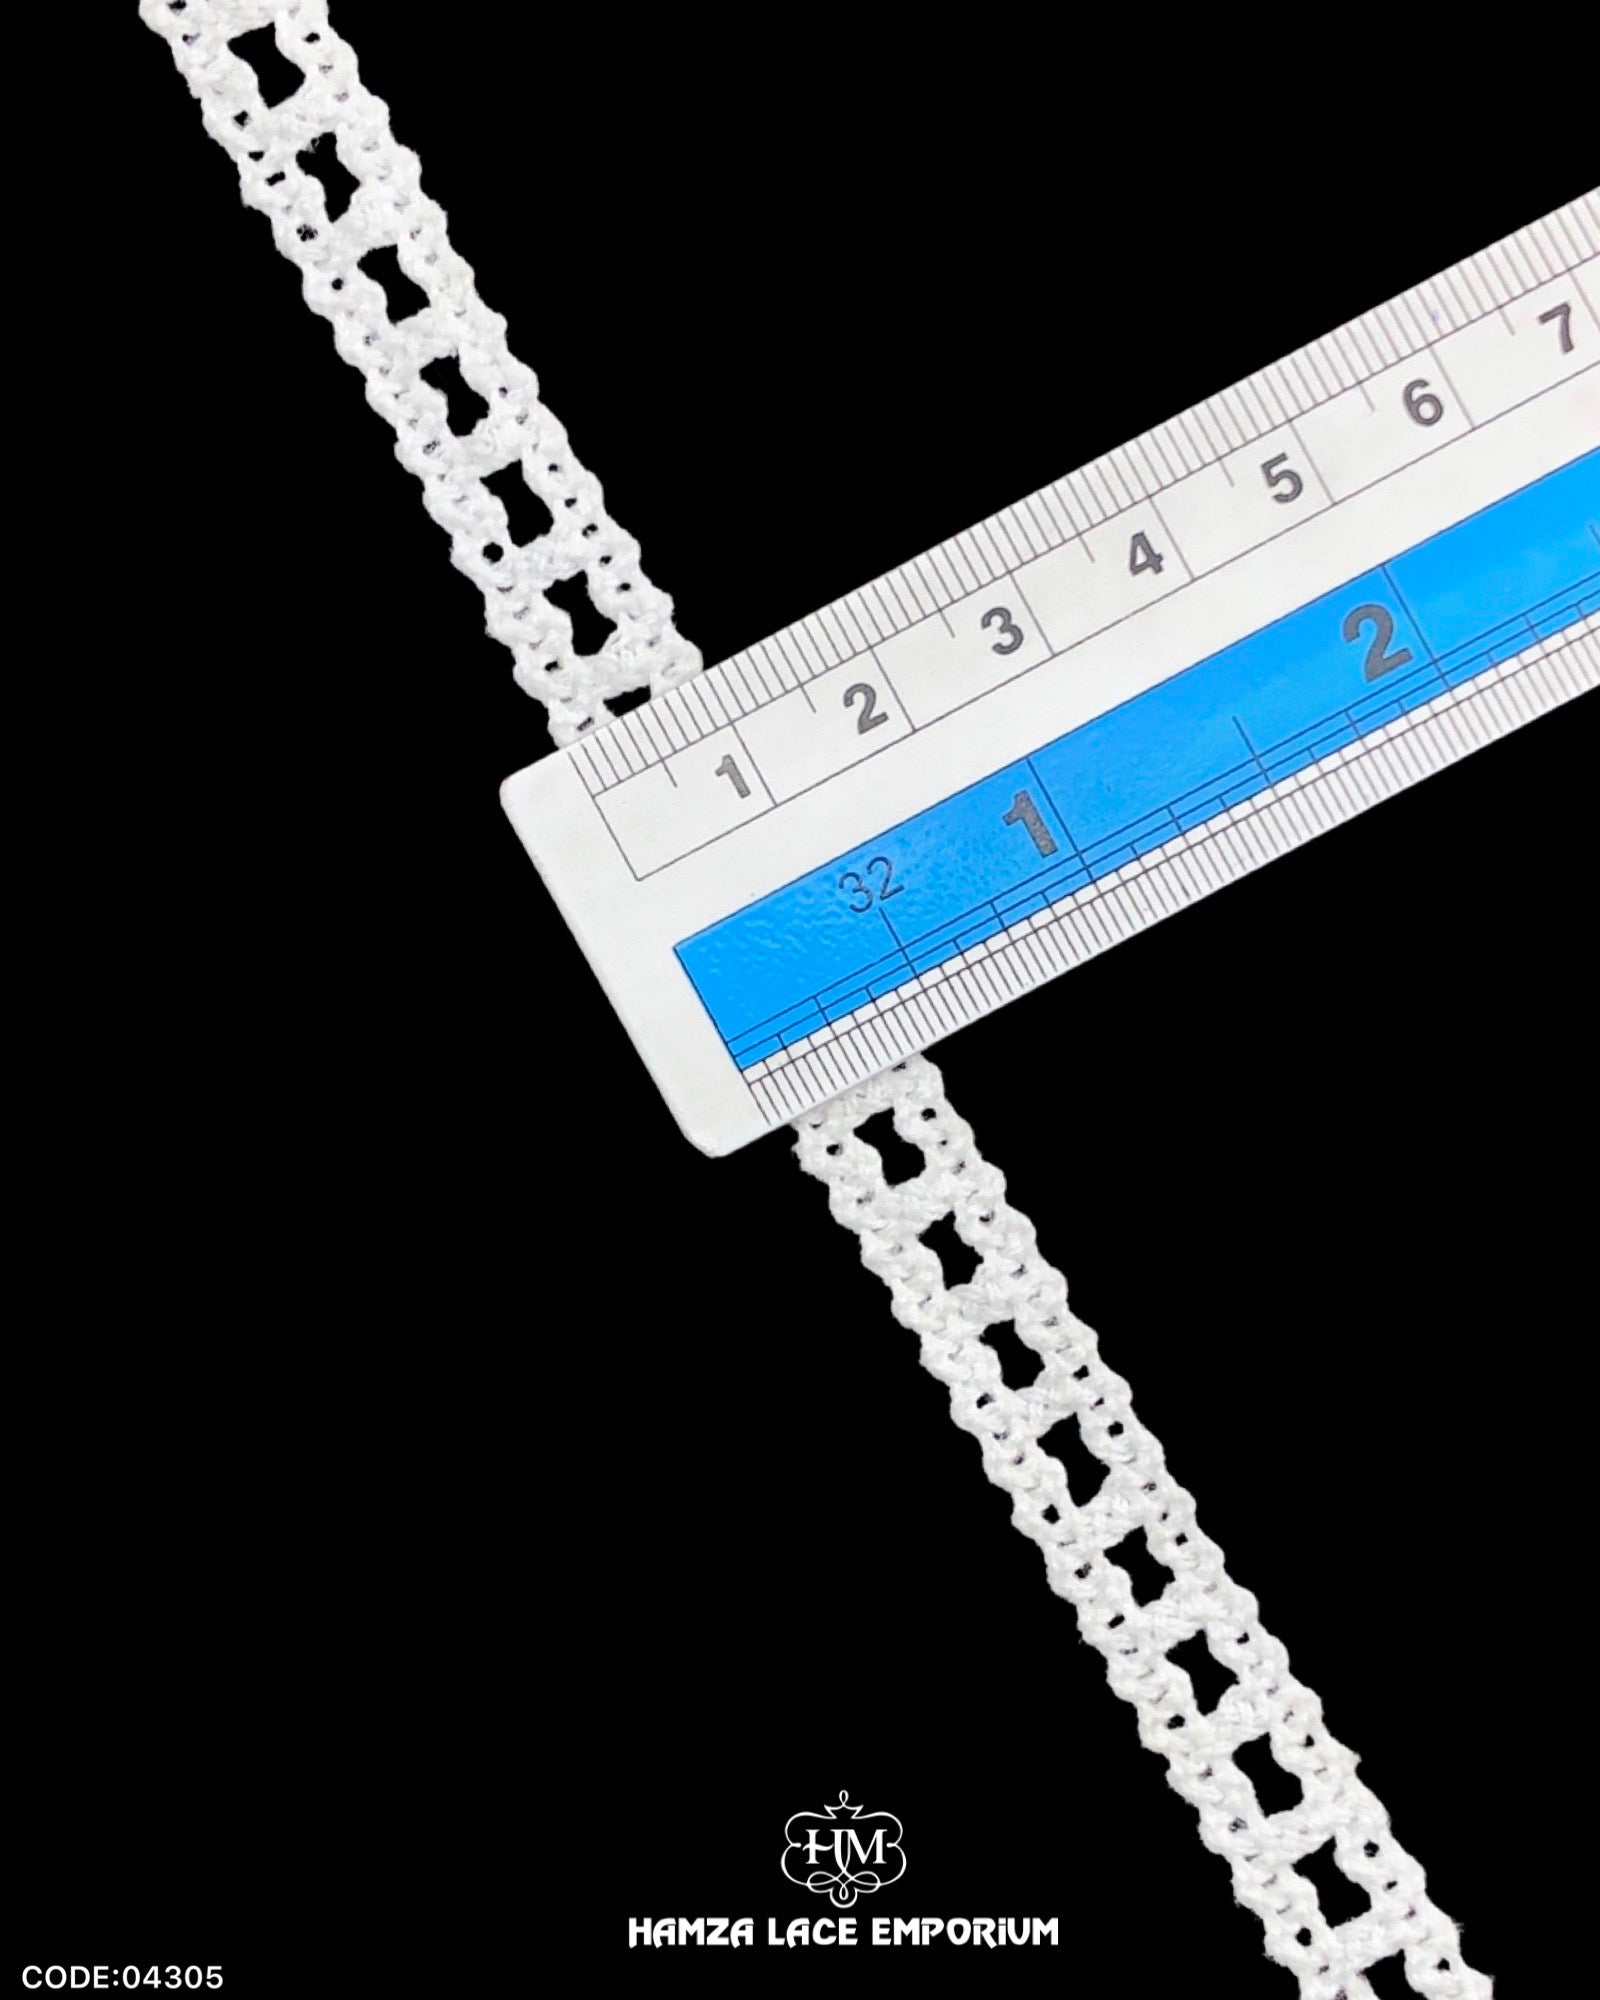 Size of the 'Center Filling Crochet Ladder Lace 04305' is shown with the help of a ruler as '0.5' inches